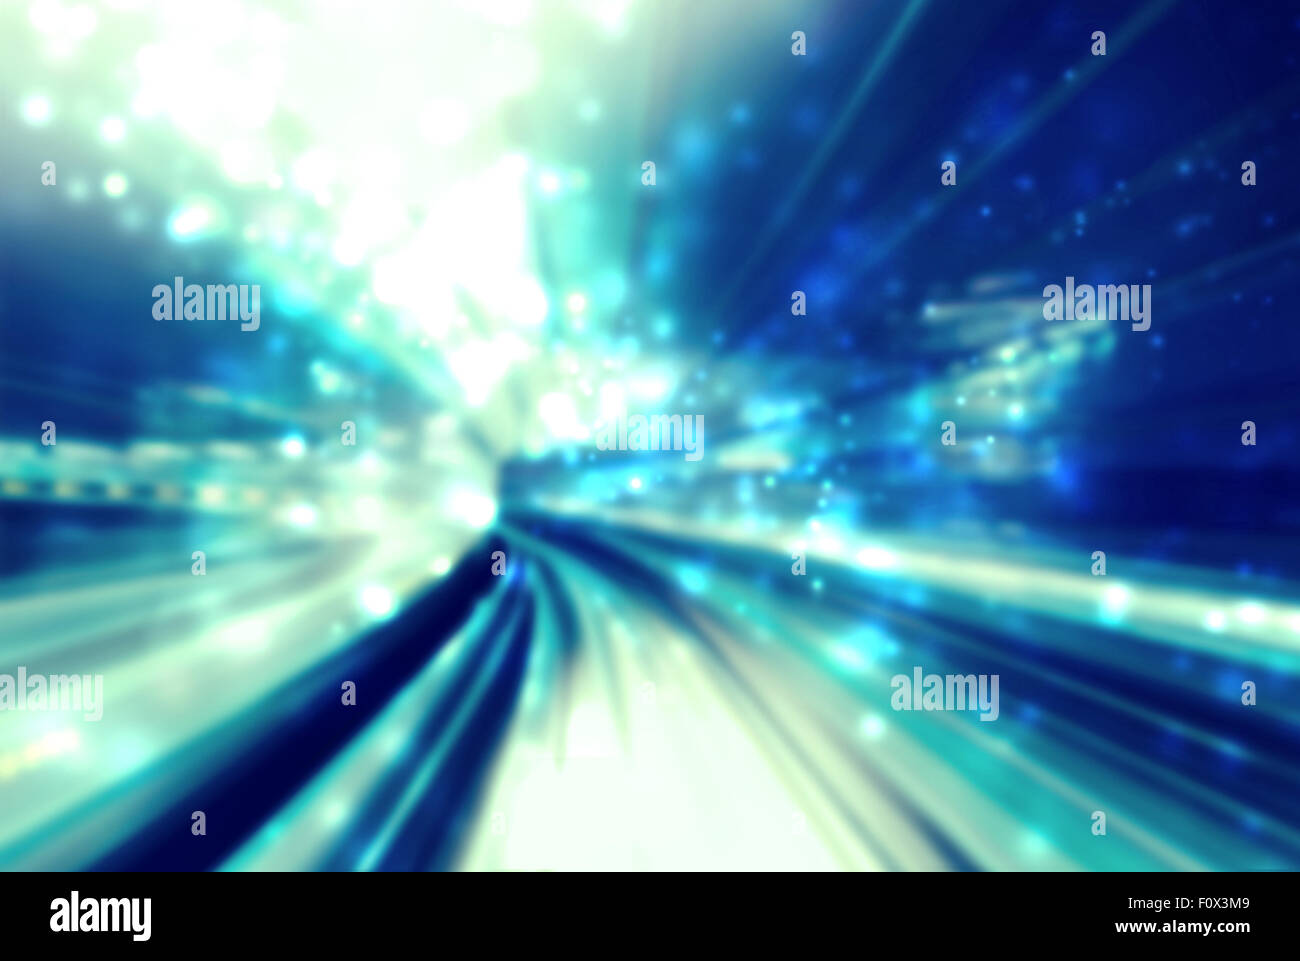 Light tunnel blue abstract futuristic pathway background Stock Photo